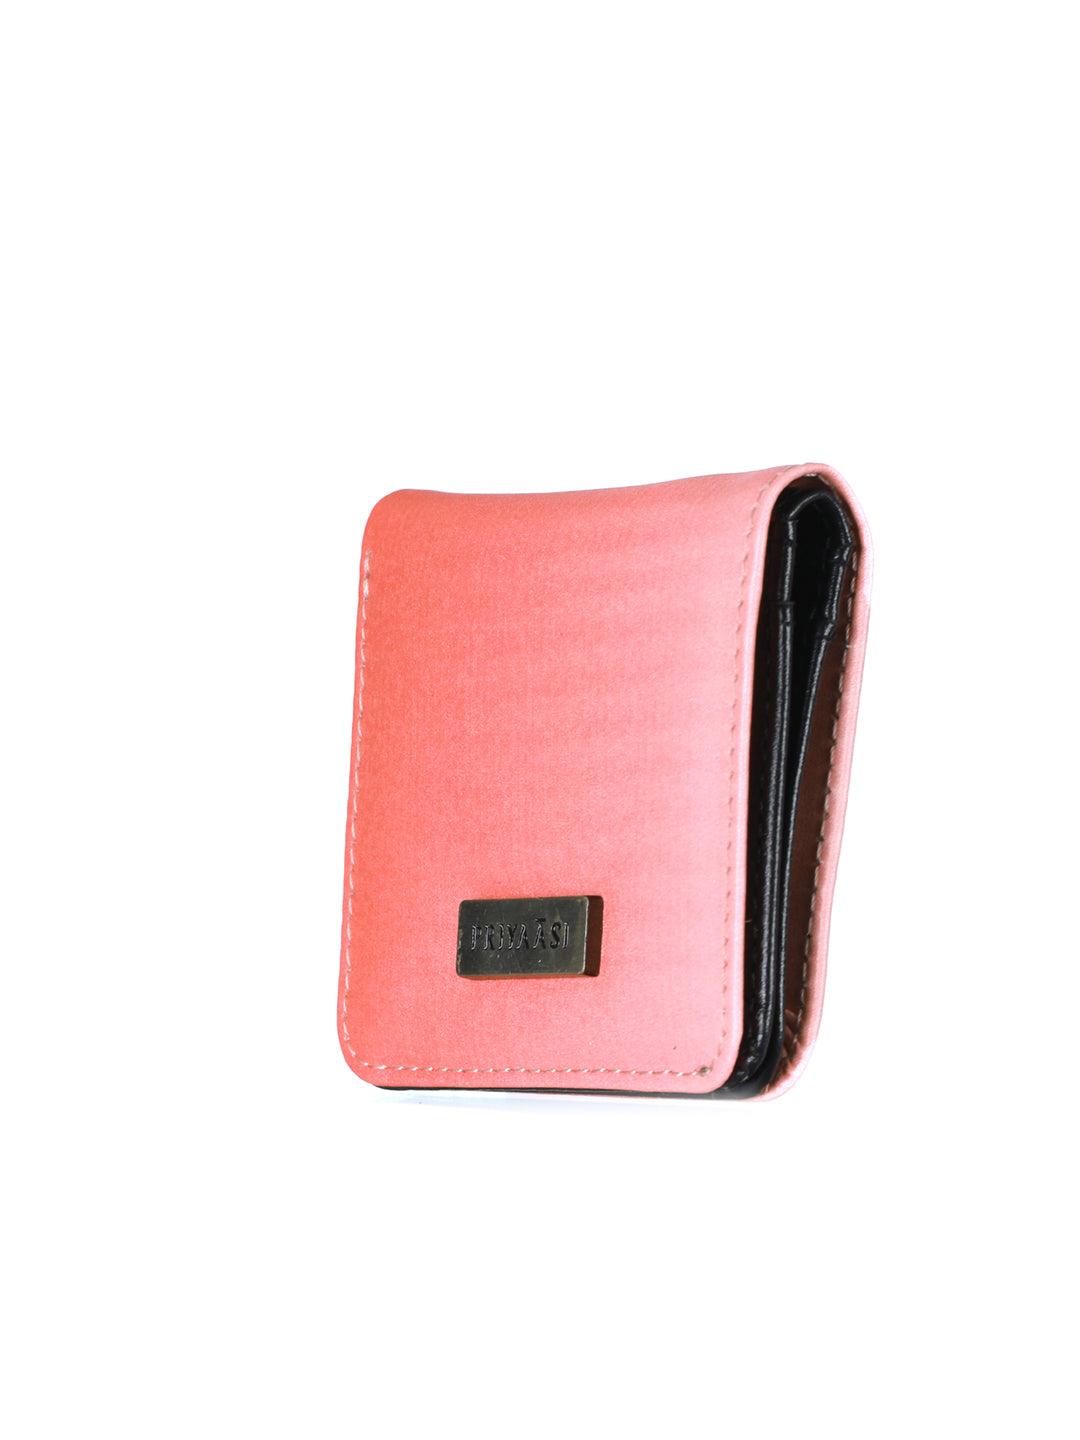 Women's Peach Ombre Solid Two Fold Wallet - Priyaasi - Indiakreations